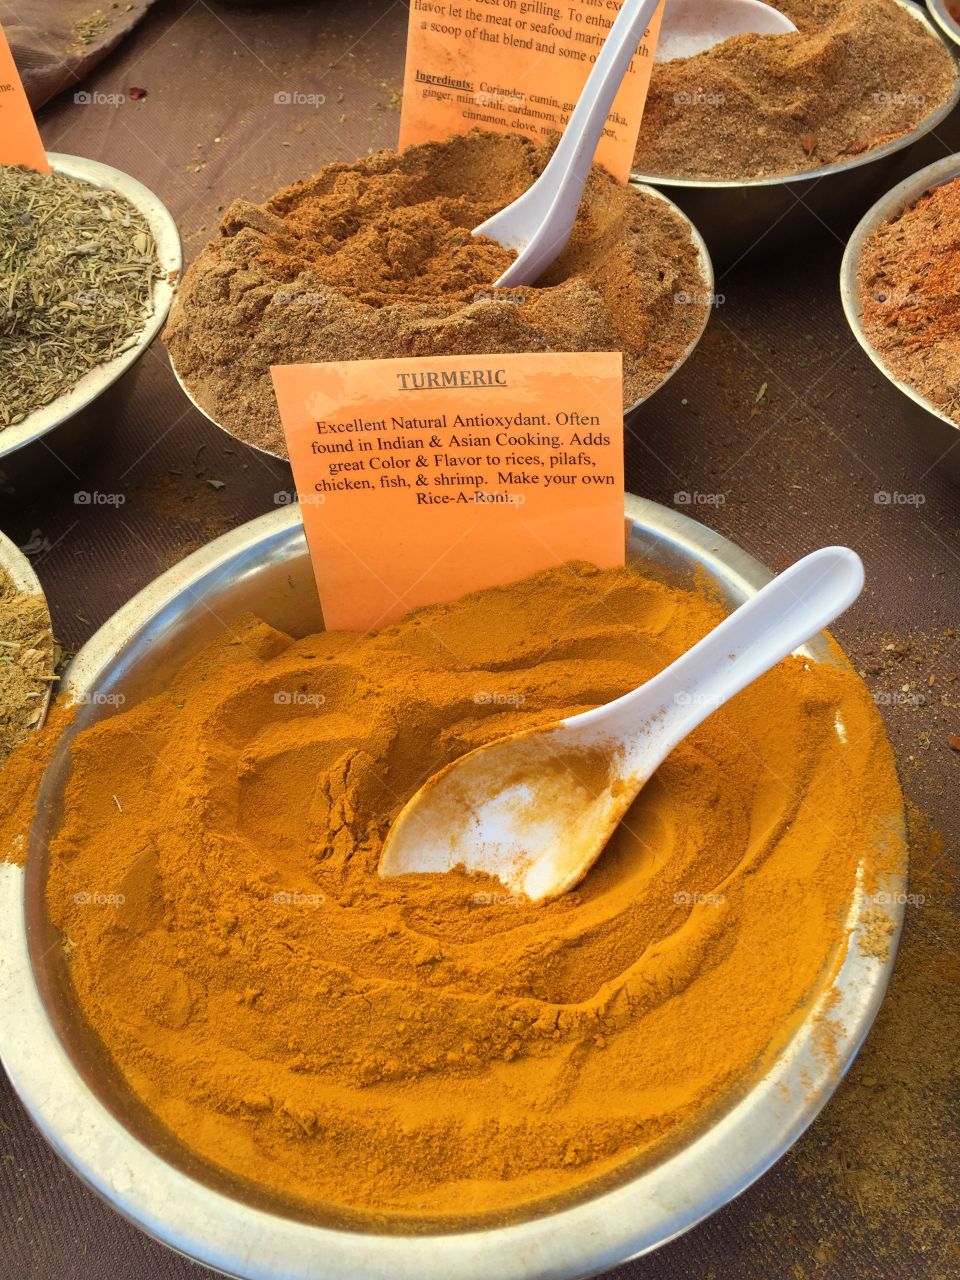 Shopping for spices, turmeric.